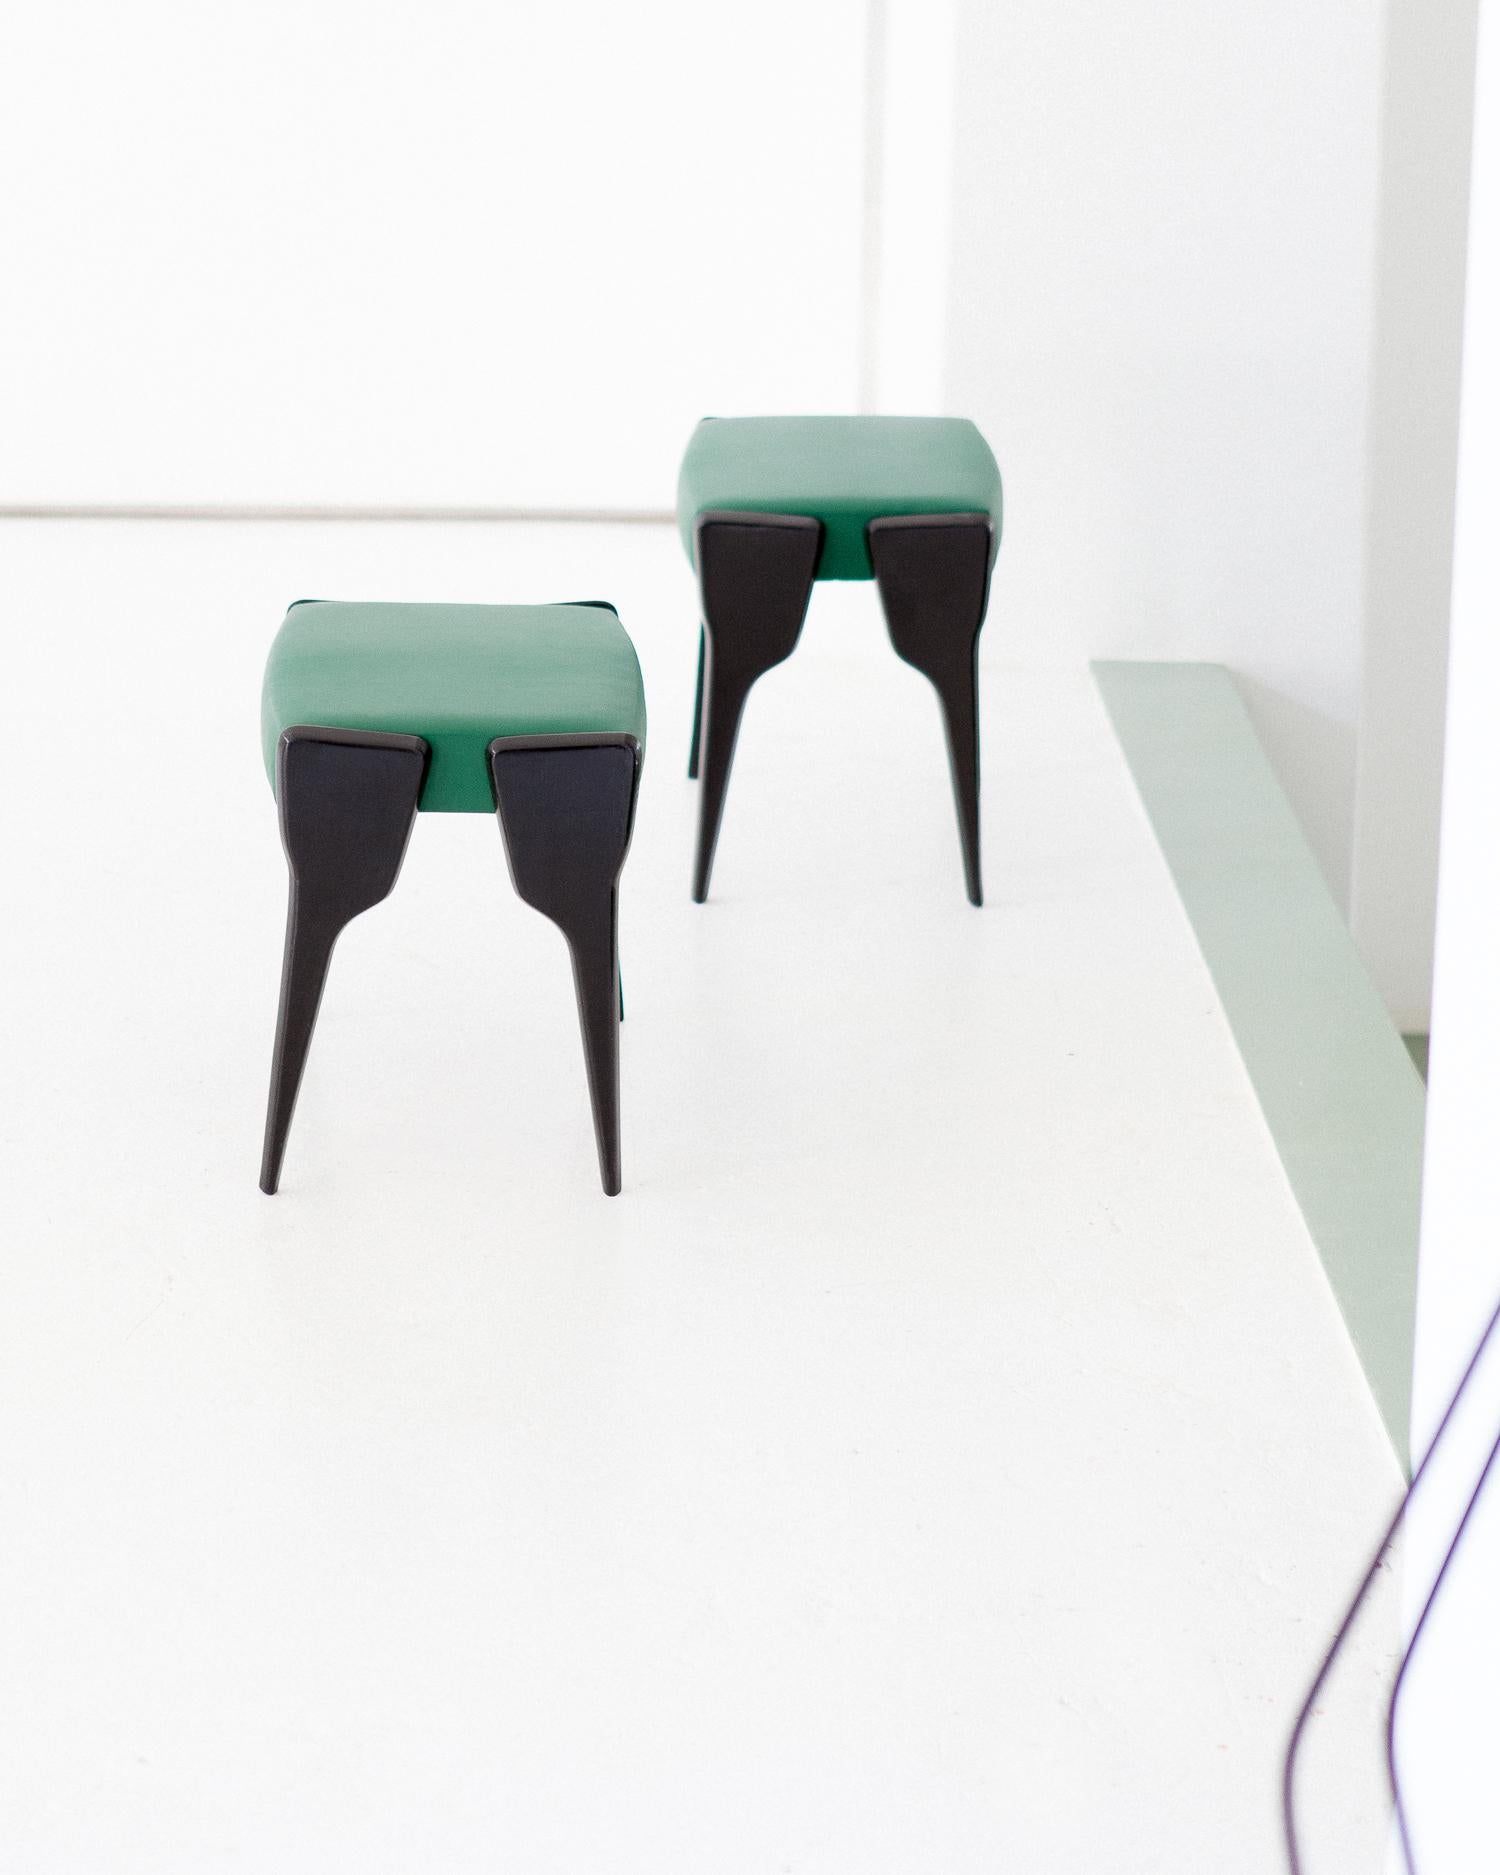 Pair of Italian Modern Stool with Black Mahogany Legs and Natural Green Leather 1